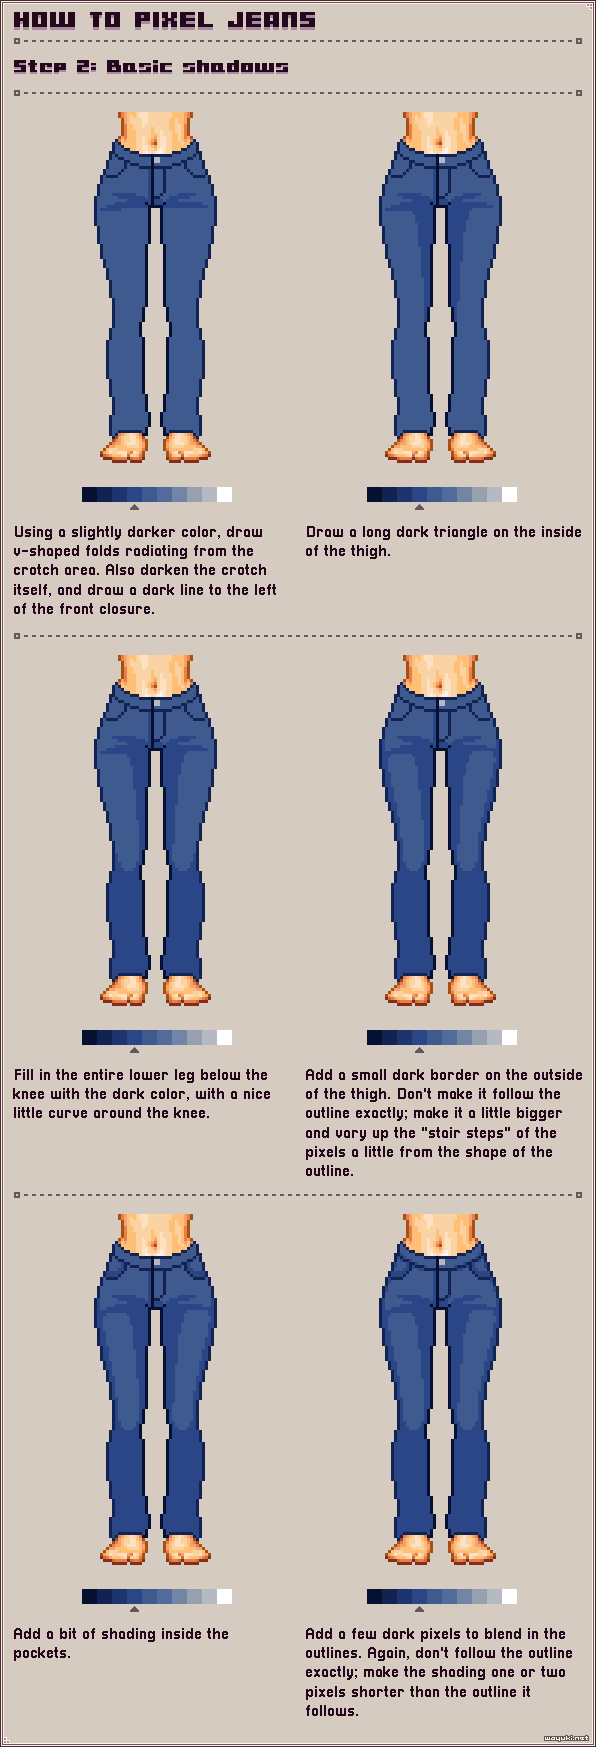 How to pixel jeans step 2